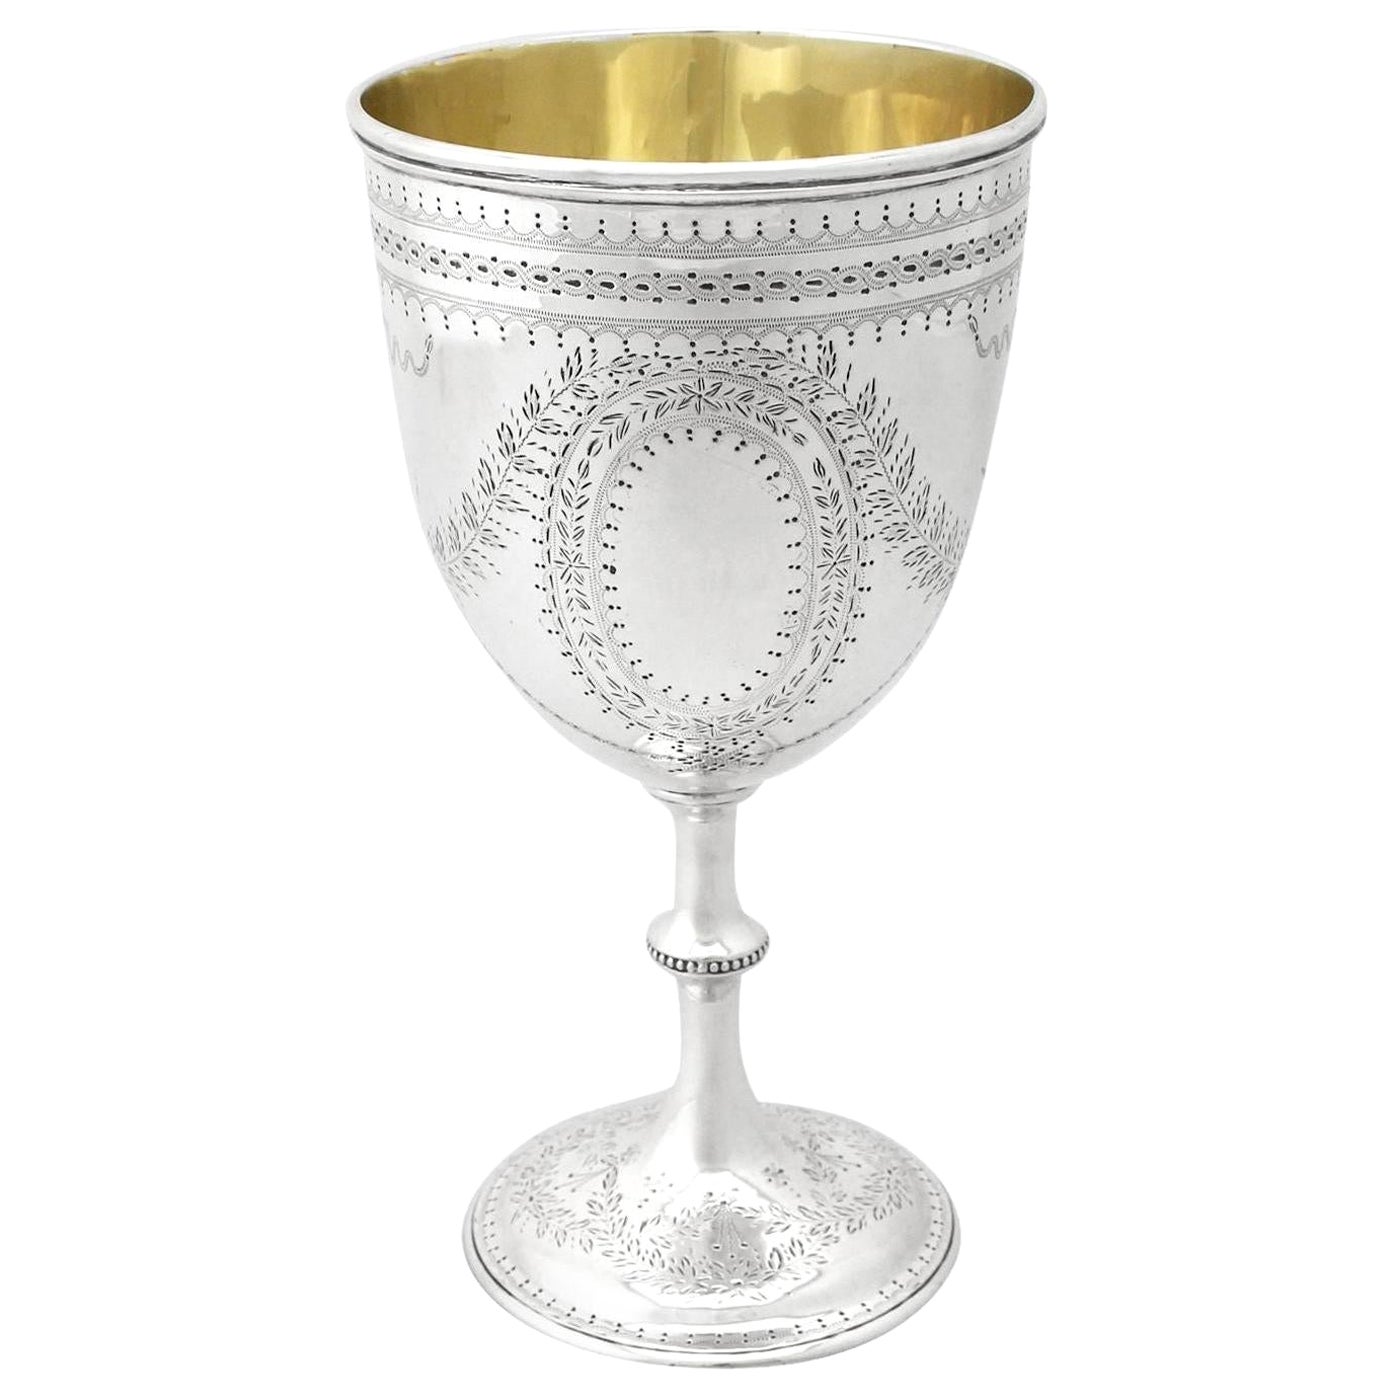 What is the cup called that kings drink out of?